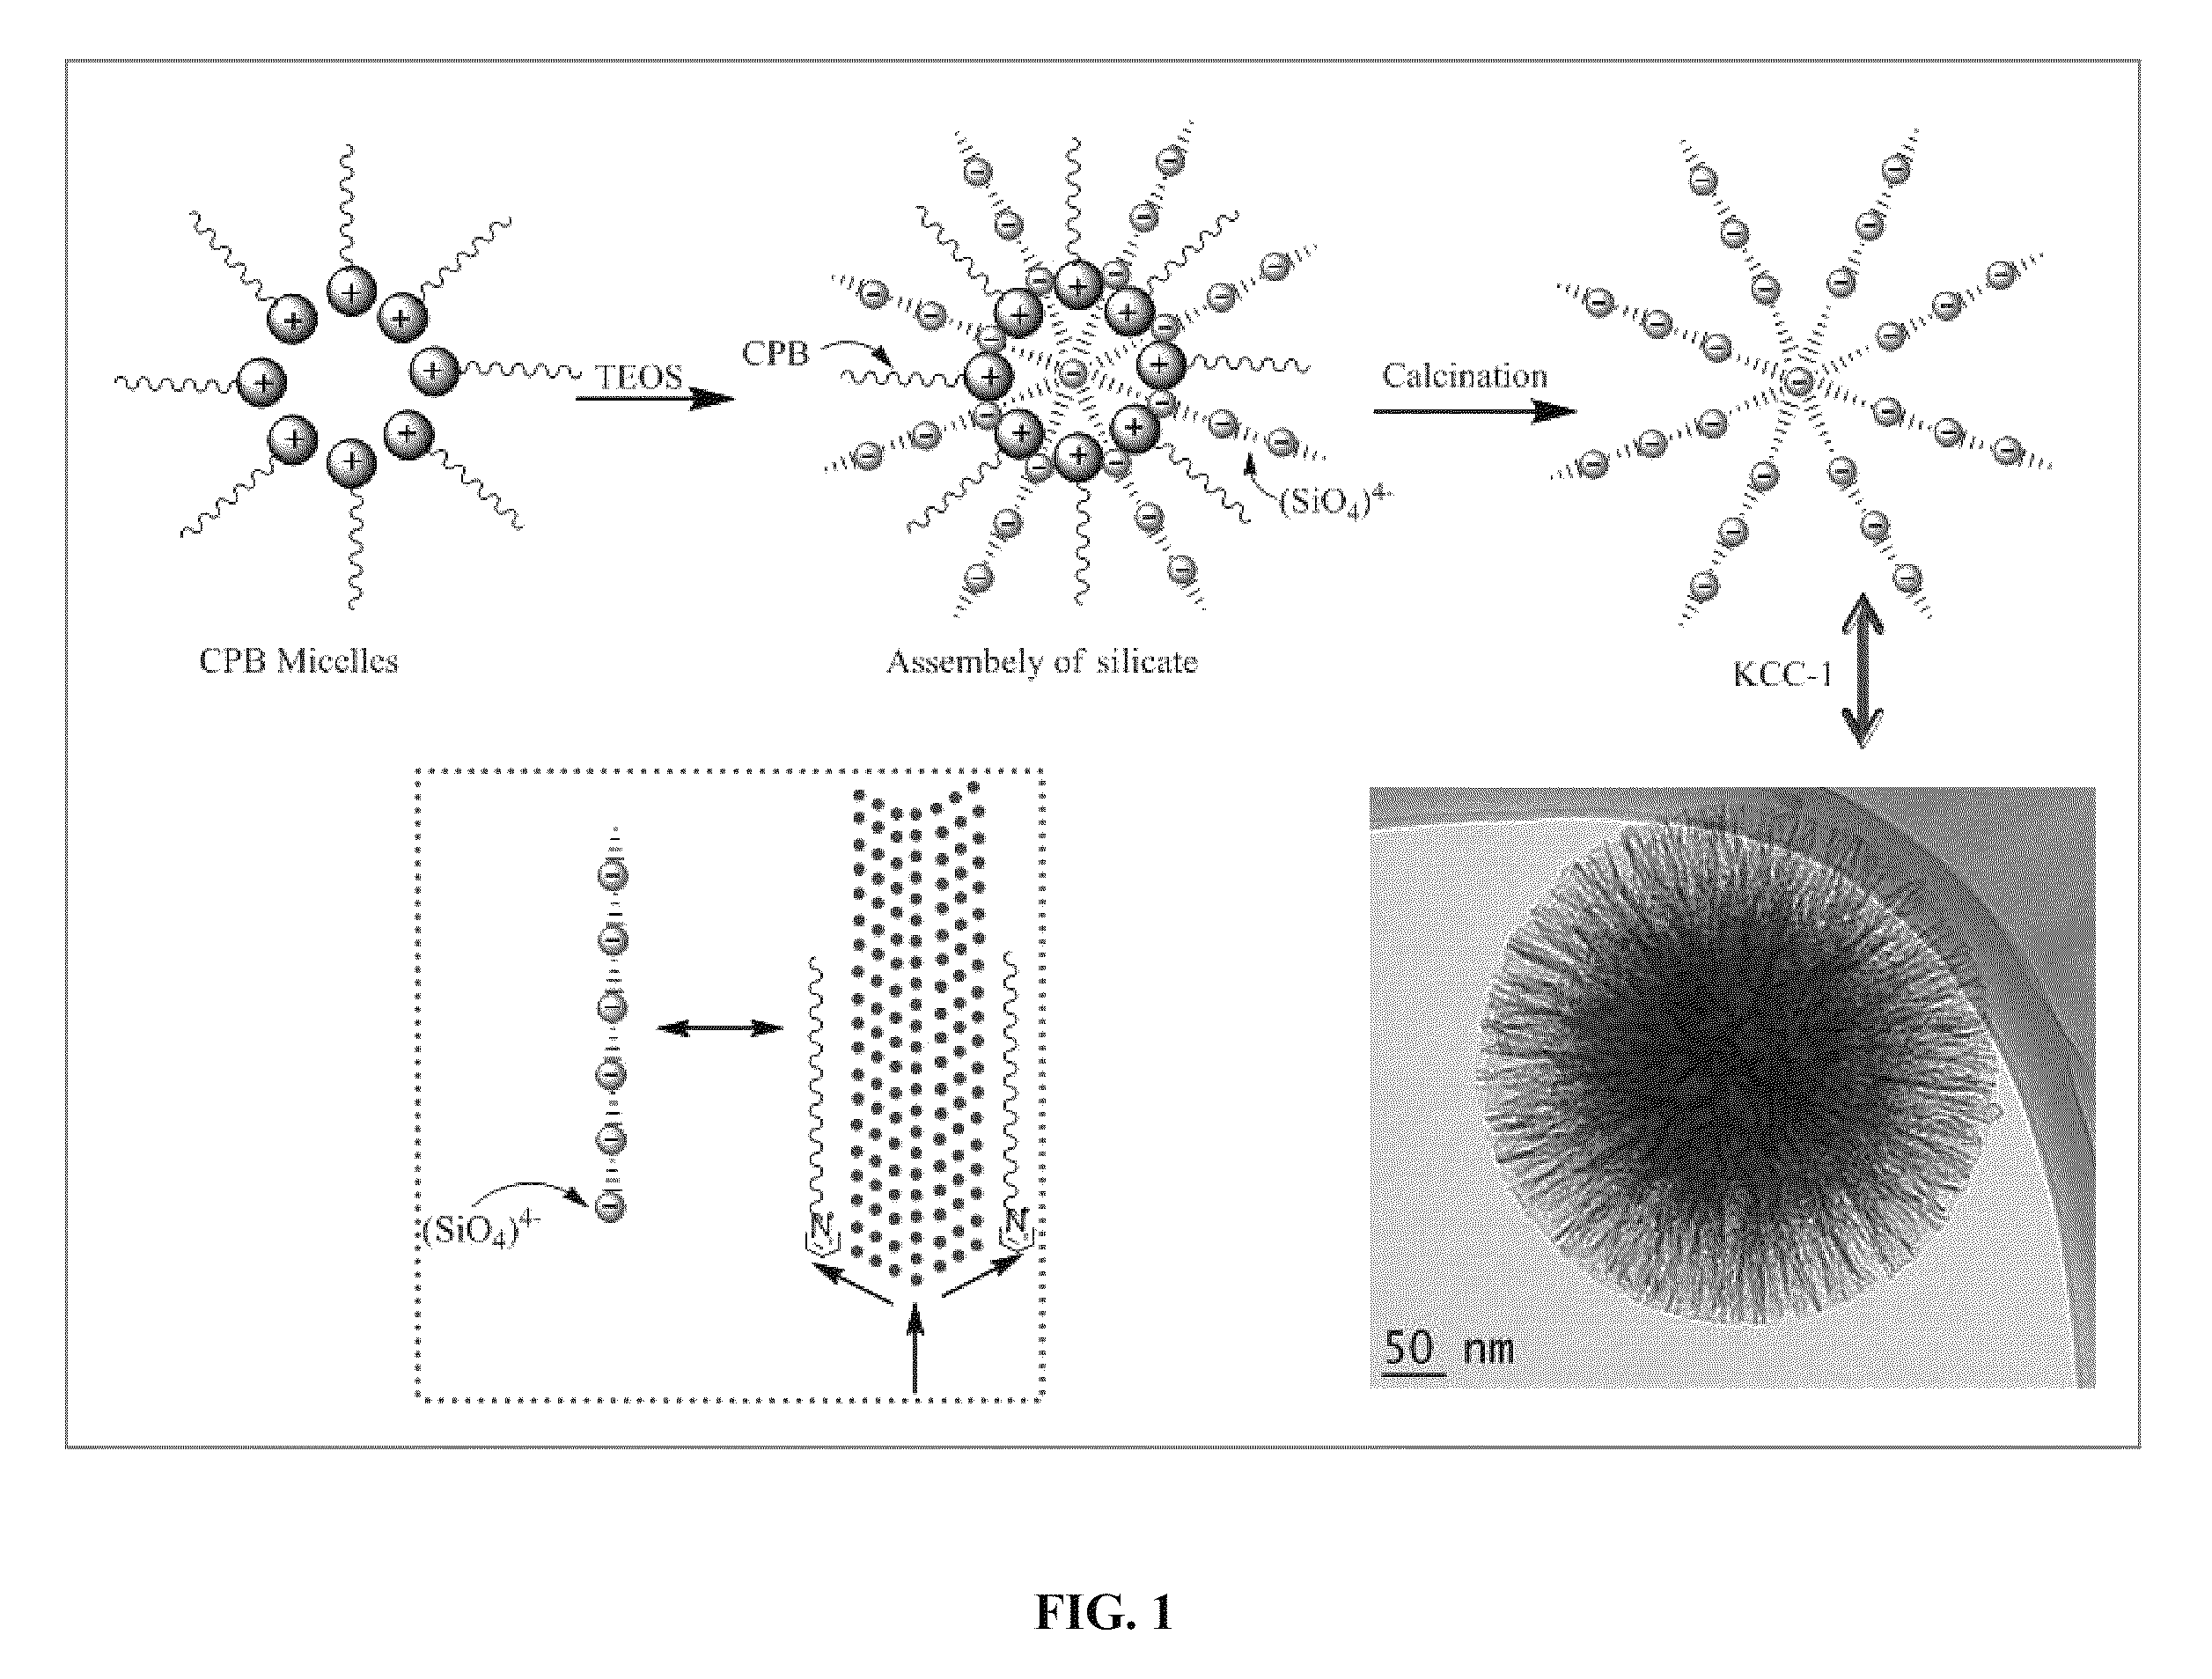 High surface area fibrous silica nanoparticles